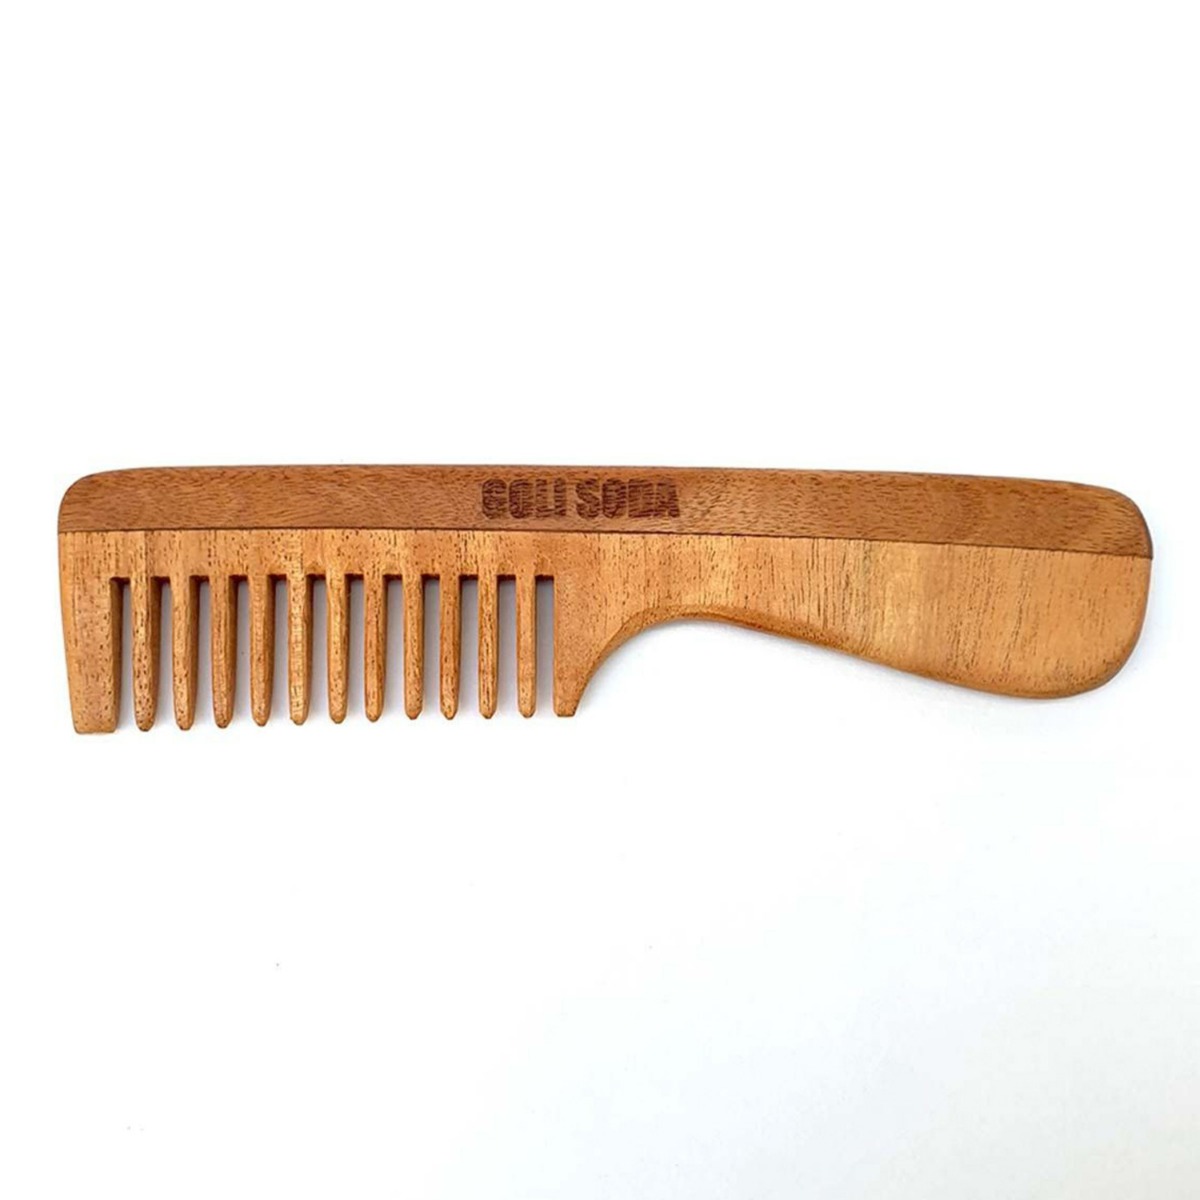 Goli Soda Neem Wood Comb - Wide Tooth with Handle, 1pc